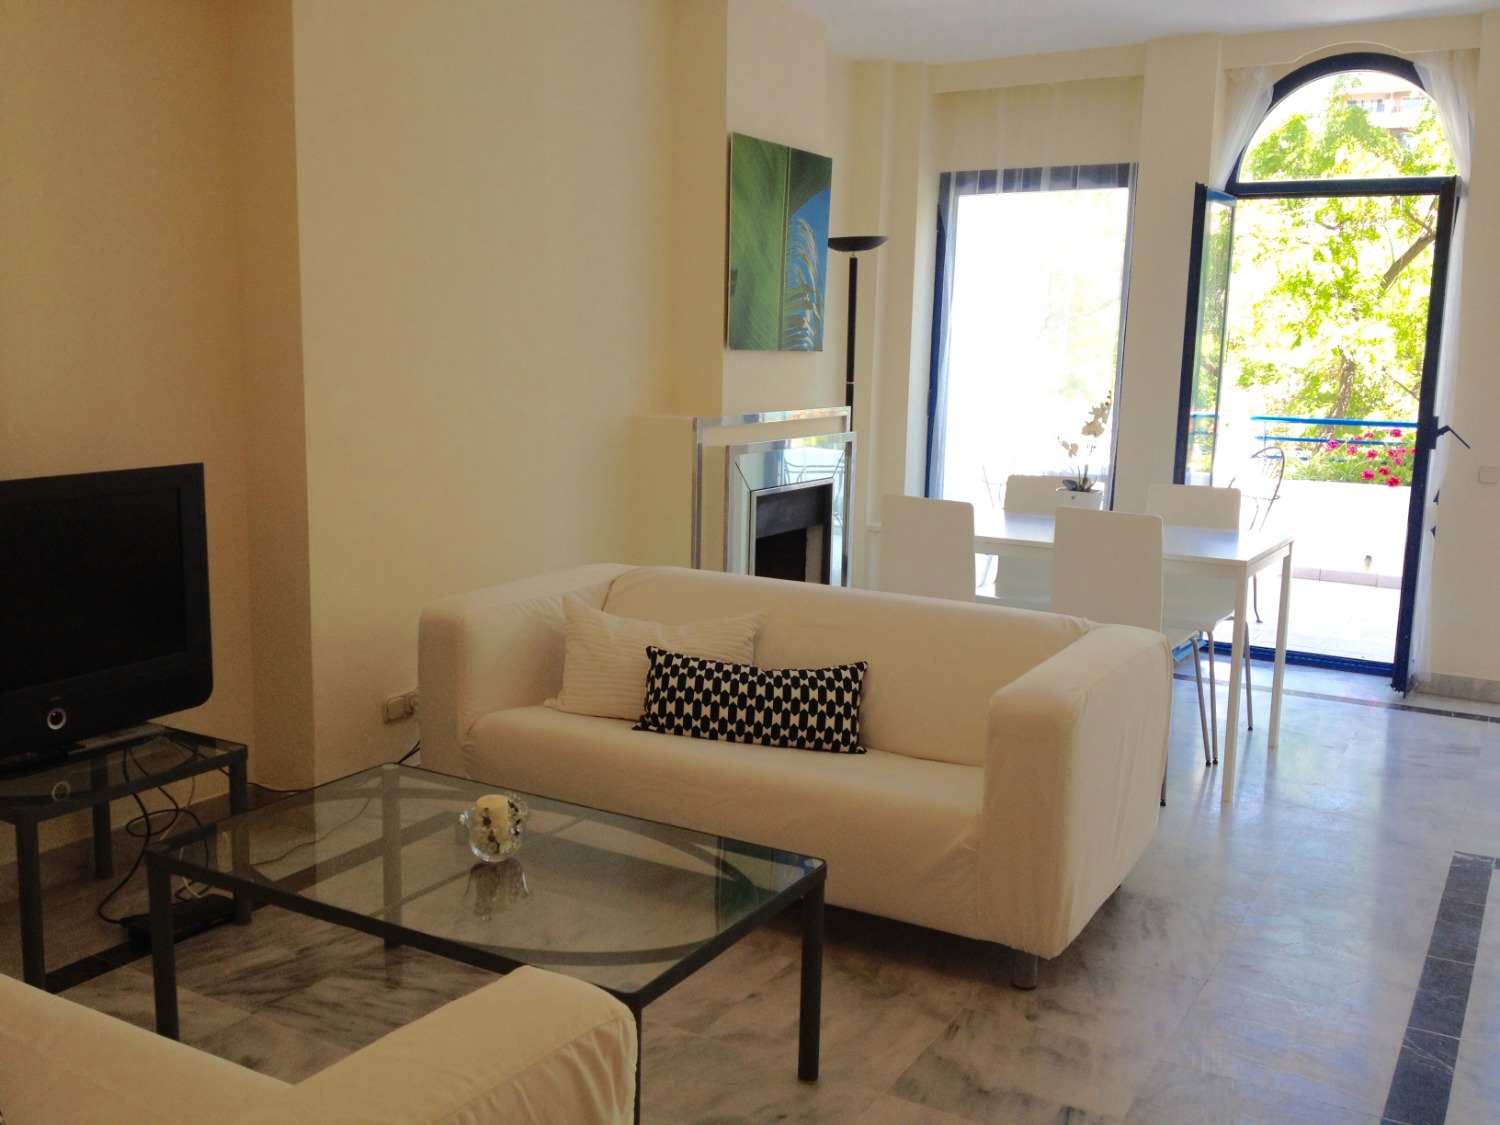 Rent. Duplex with 2 bedrooms. 1 minute walk from the beach. Marbella.